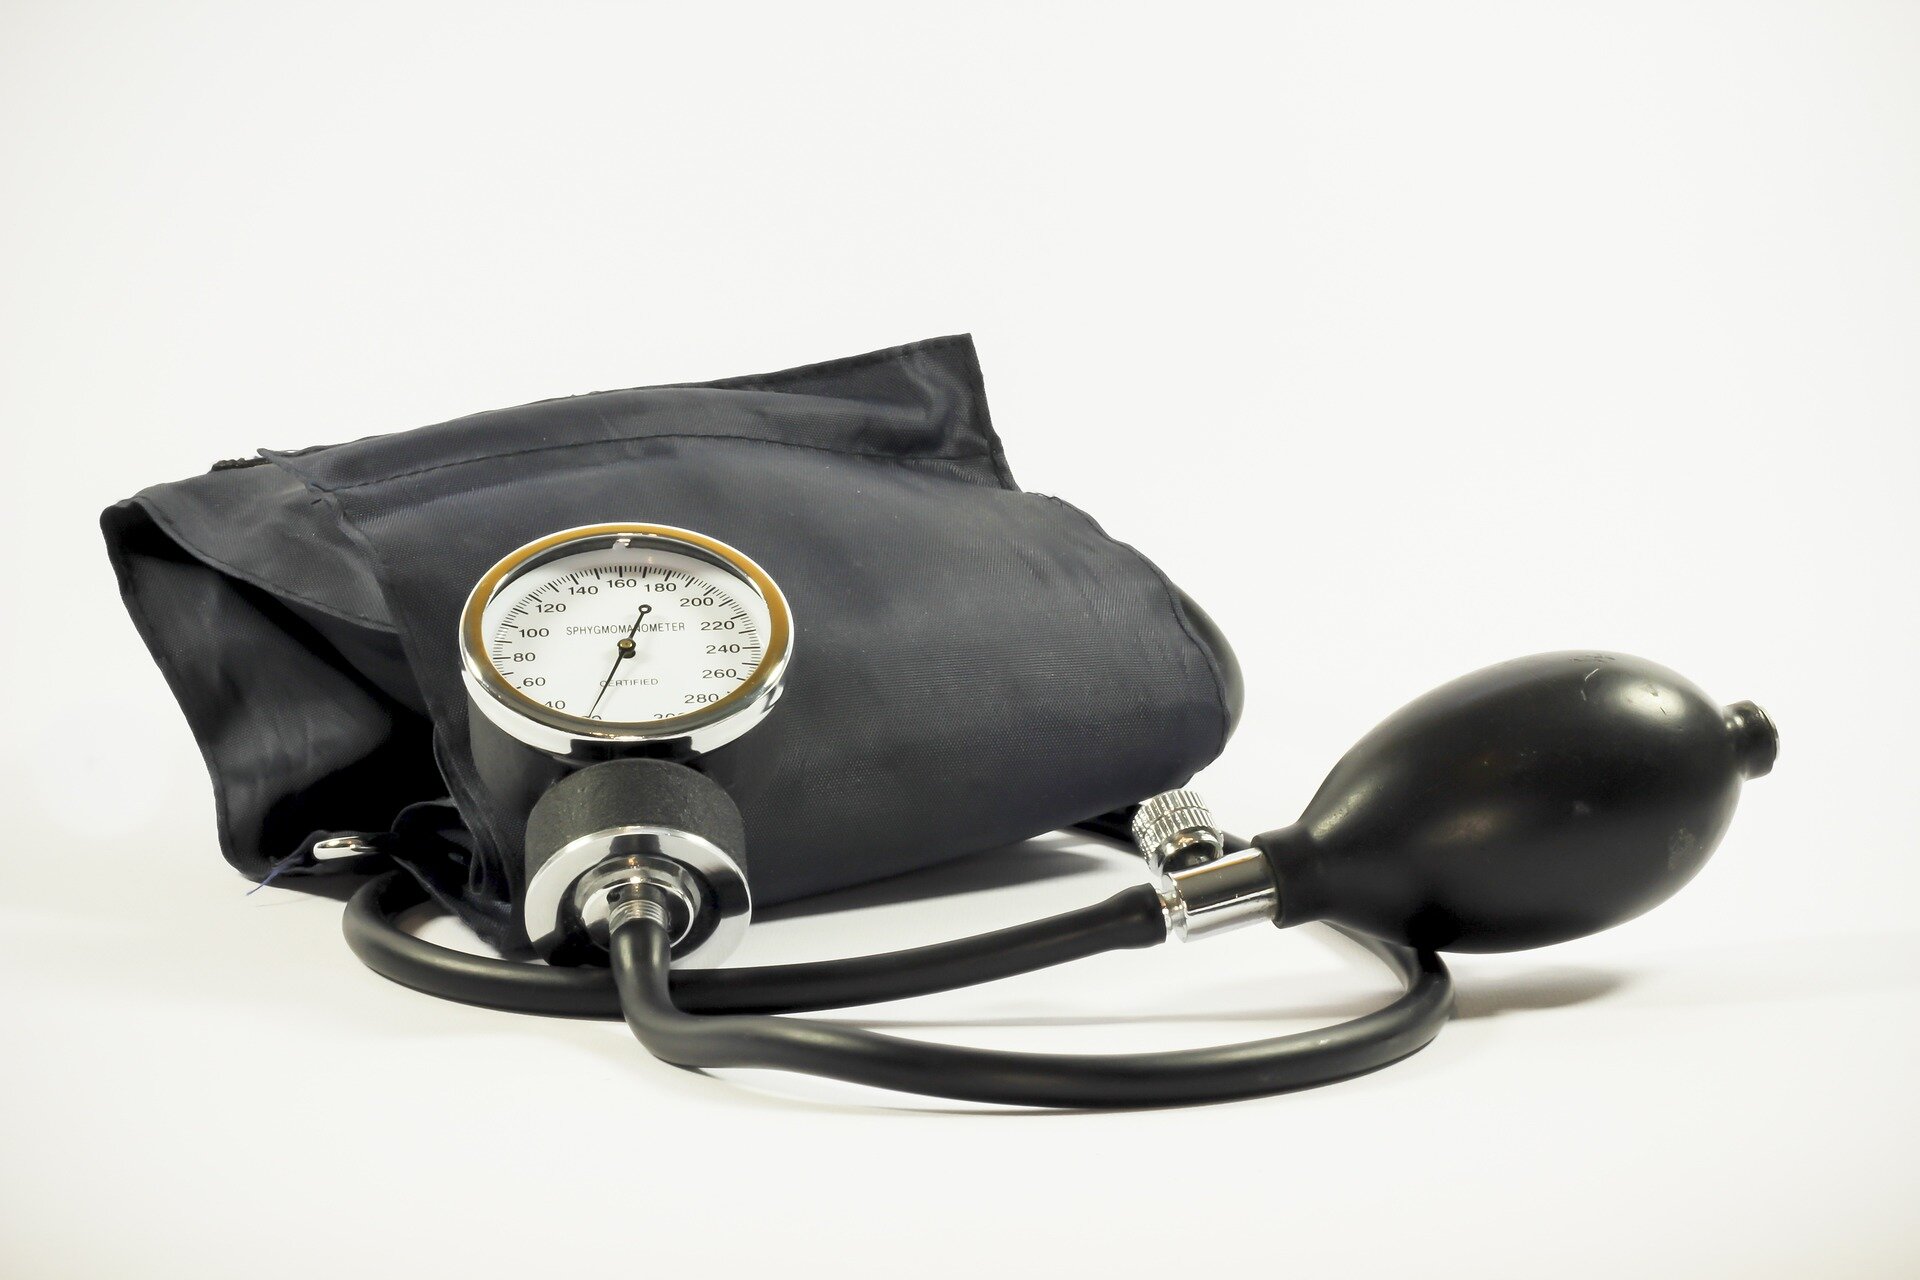 High blood pressure is the most deadly risk factor for women worldwide